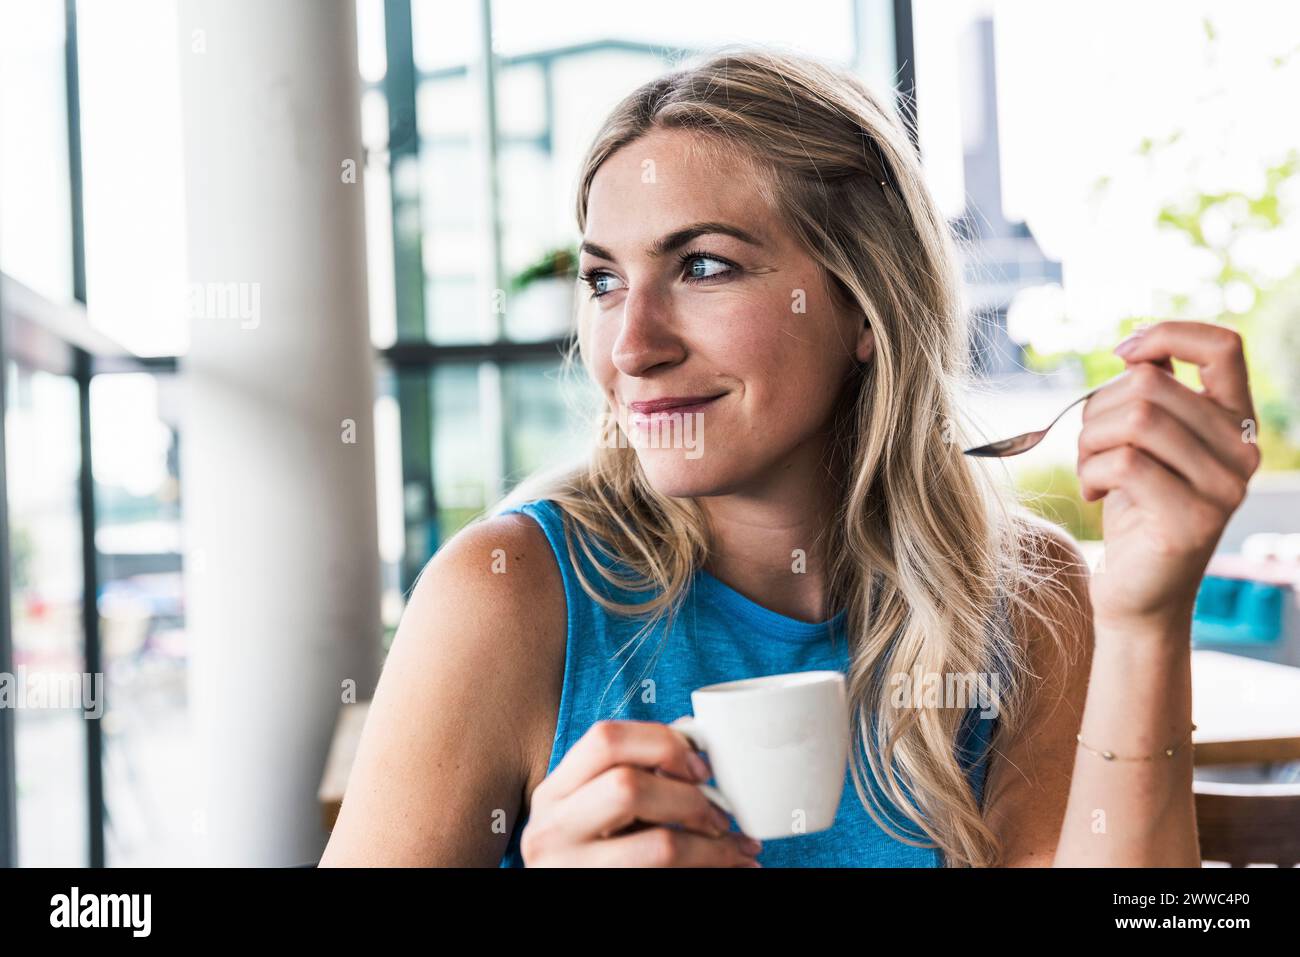 Smiling woman holding coffee cup in restaurant Stock Photo